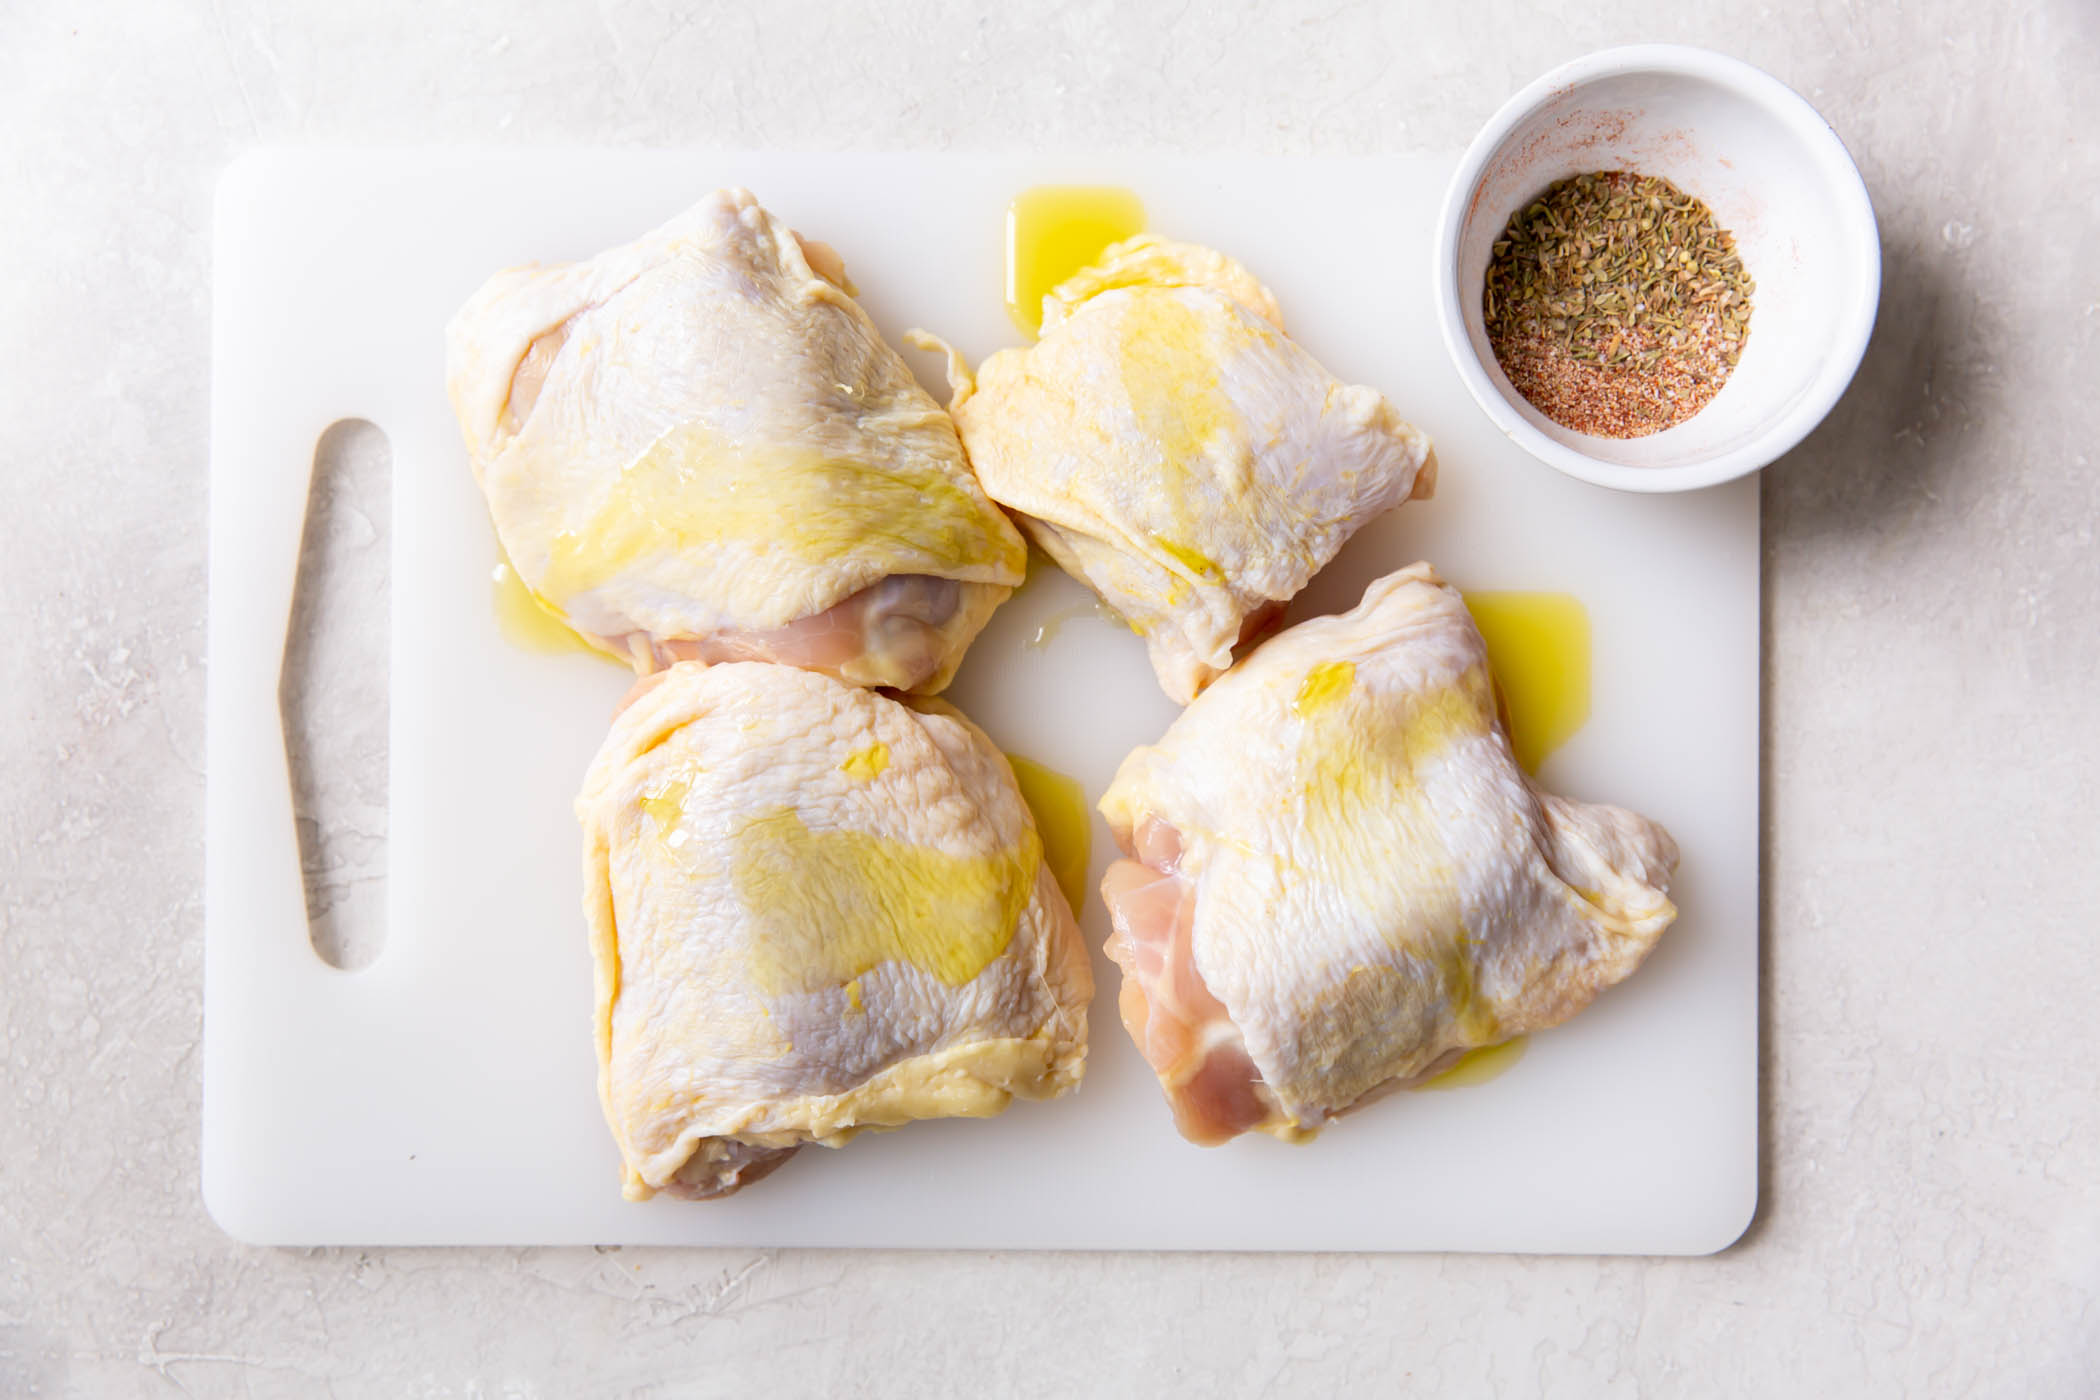 Olive oil drizzled over four uncooked bone-in chicken thighs.